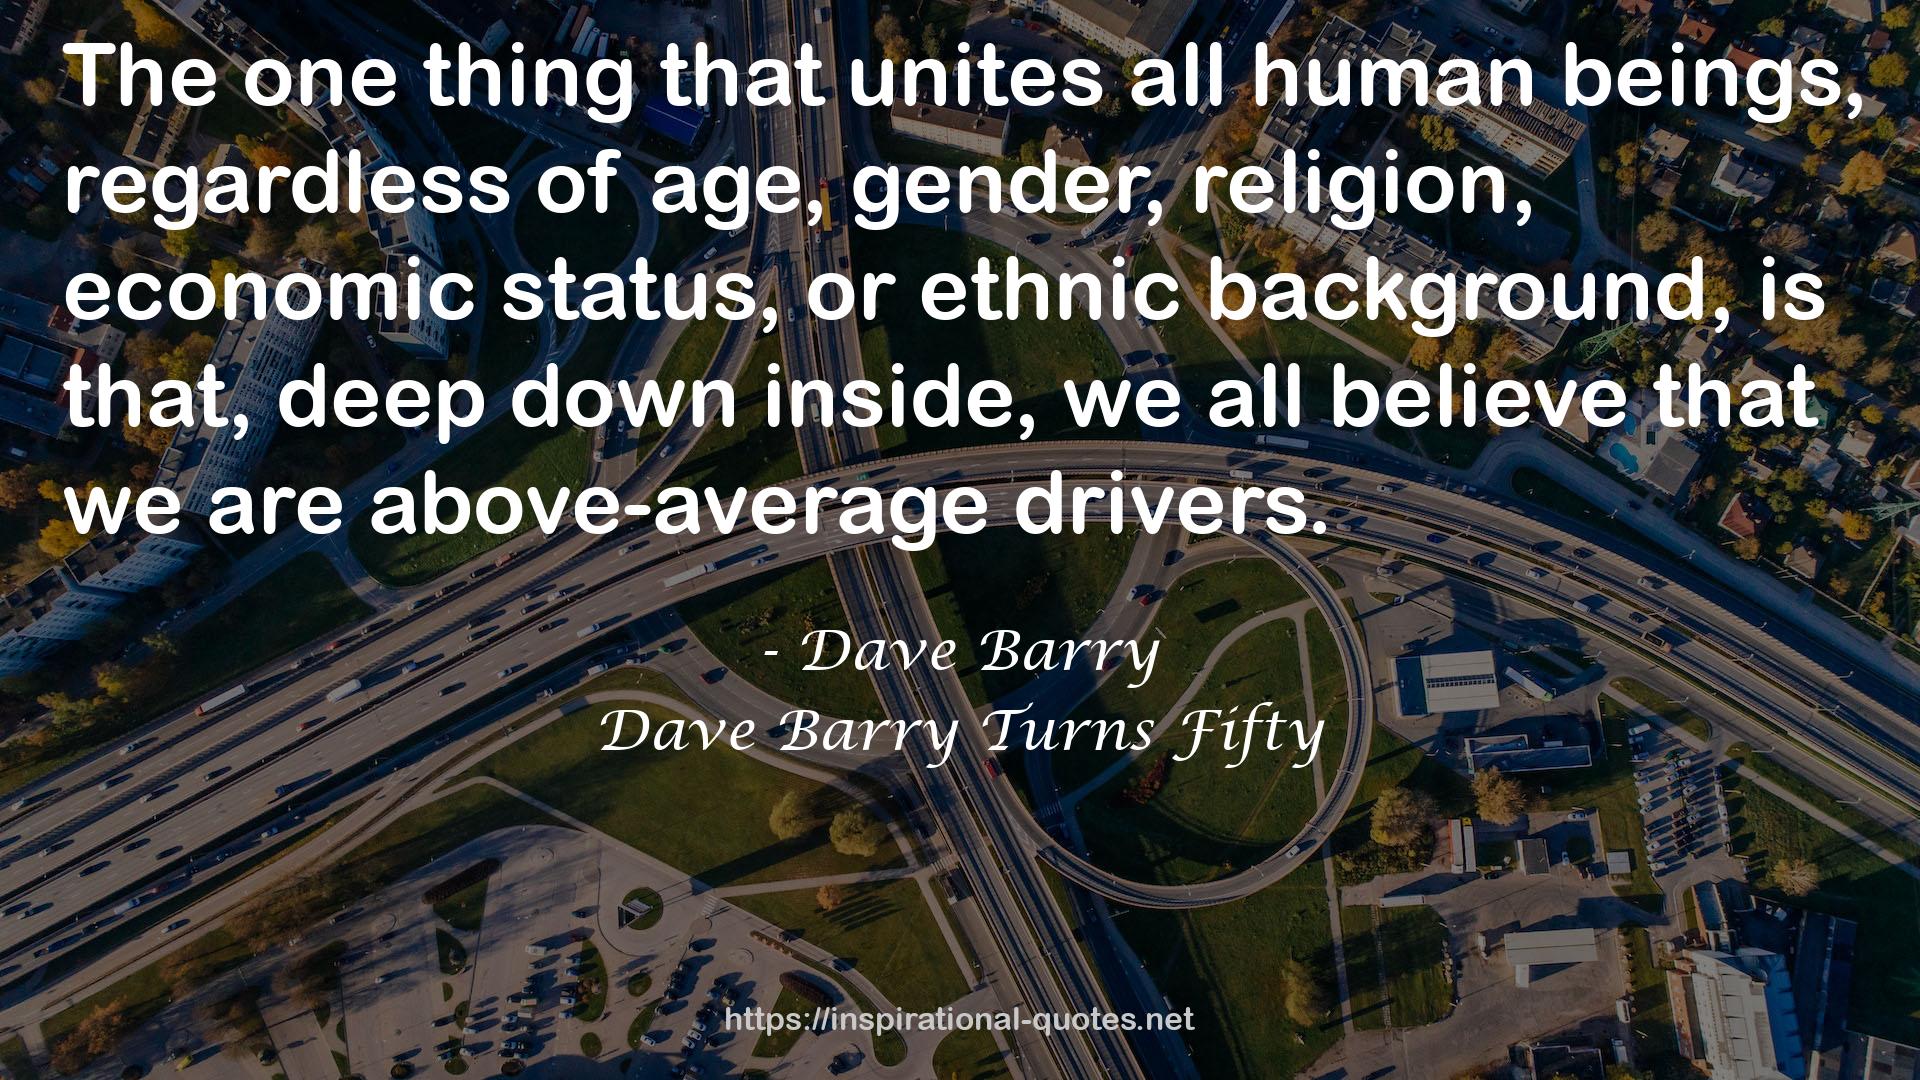 Dave Barry Turns Fifty QUOTES